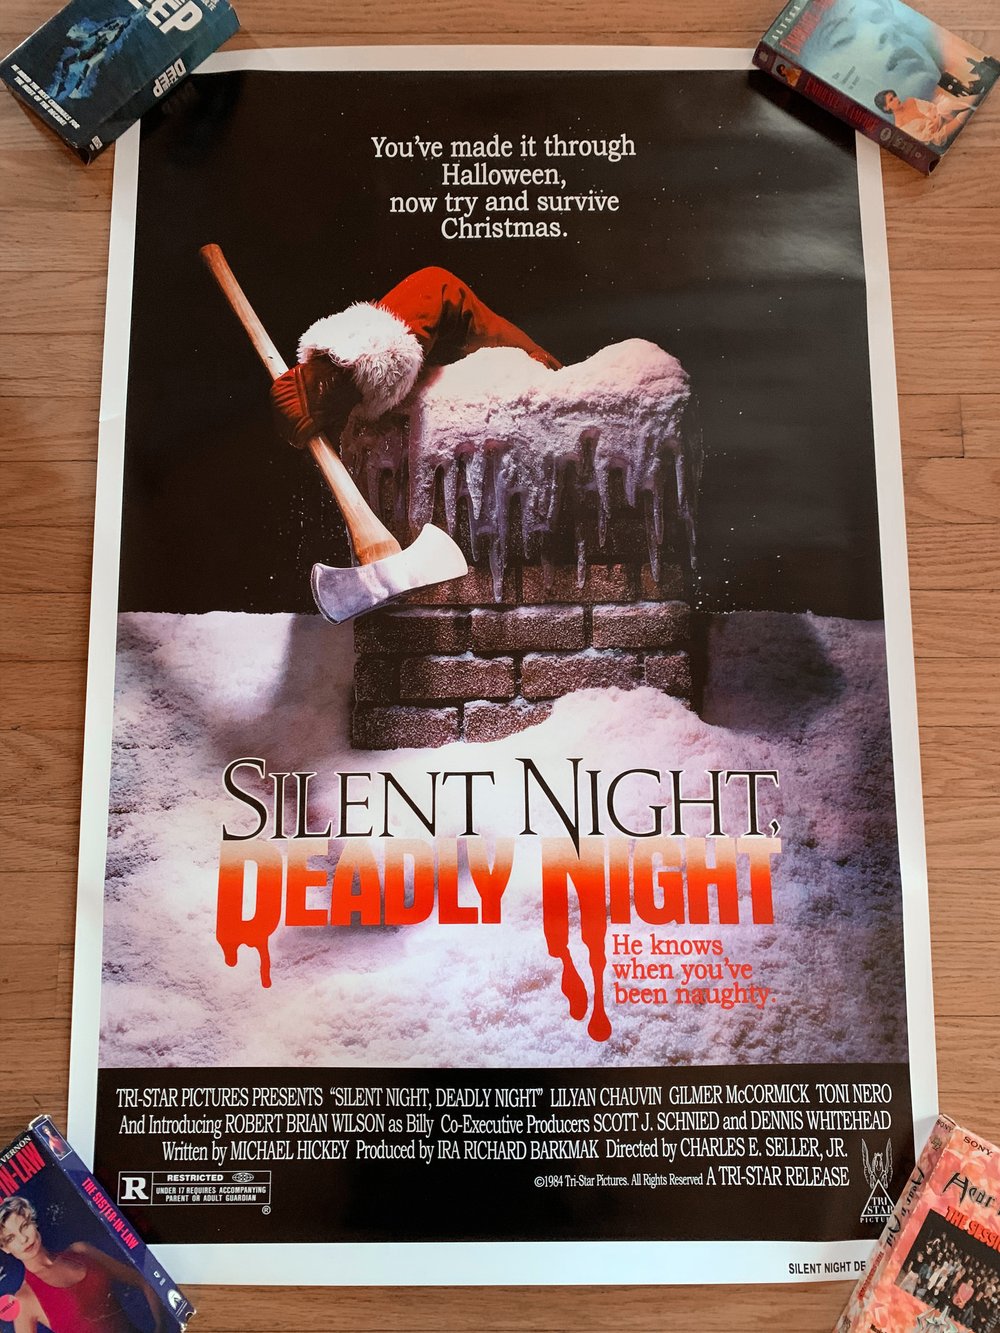 1984 SILENT NIGHT, DEADLY NIGHT Reproduction U.S. One Sheet Movie Poster